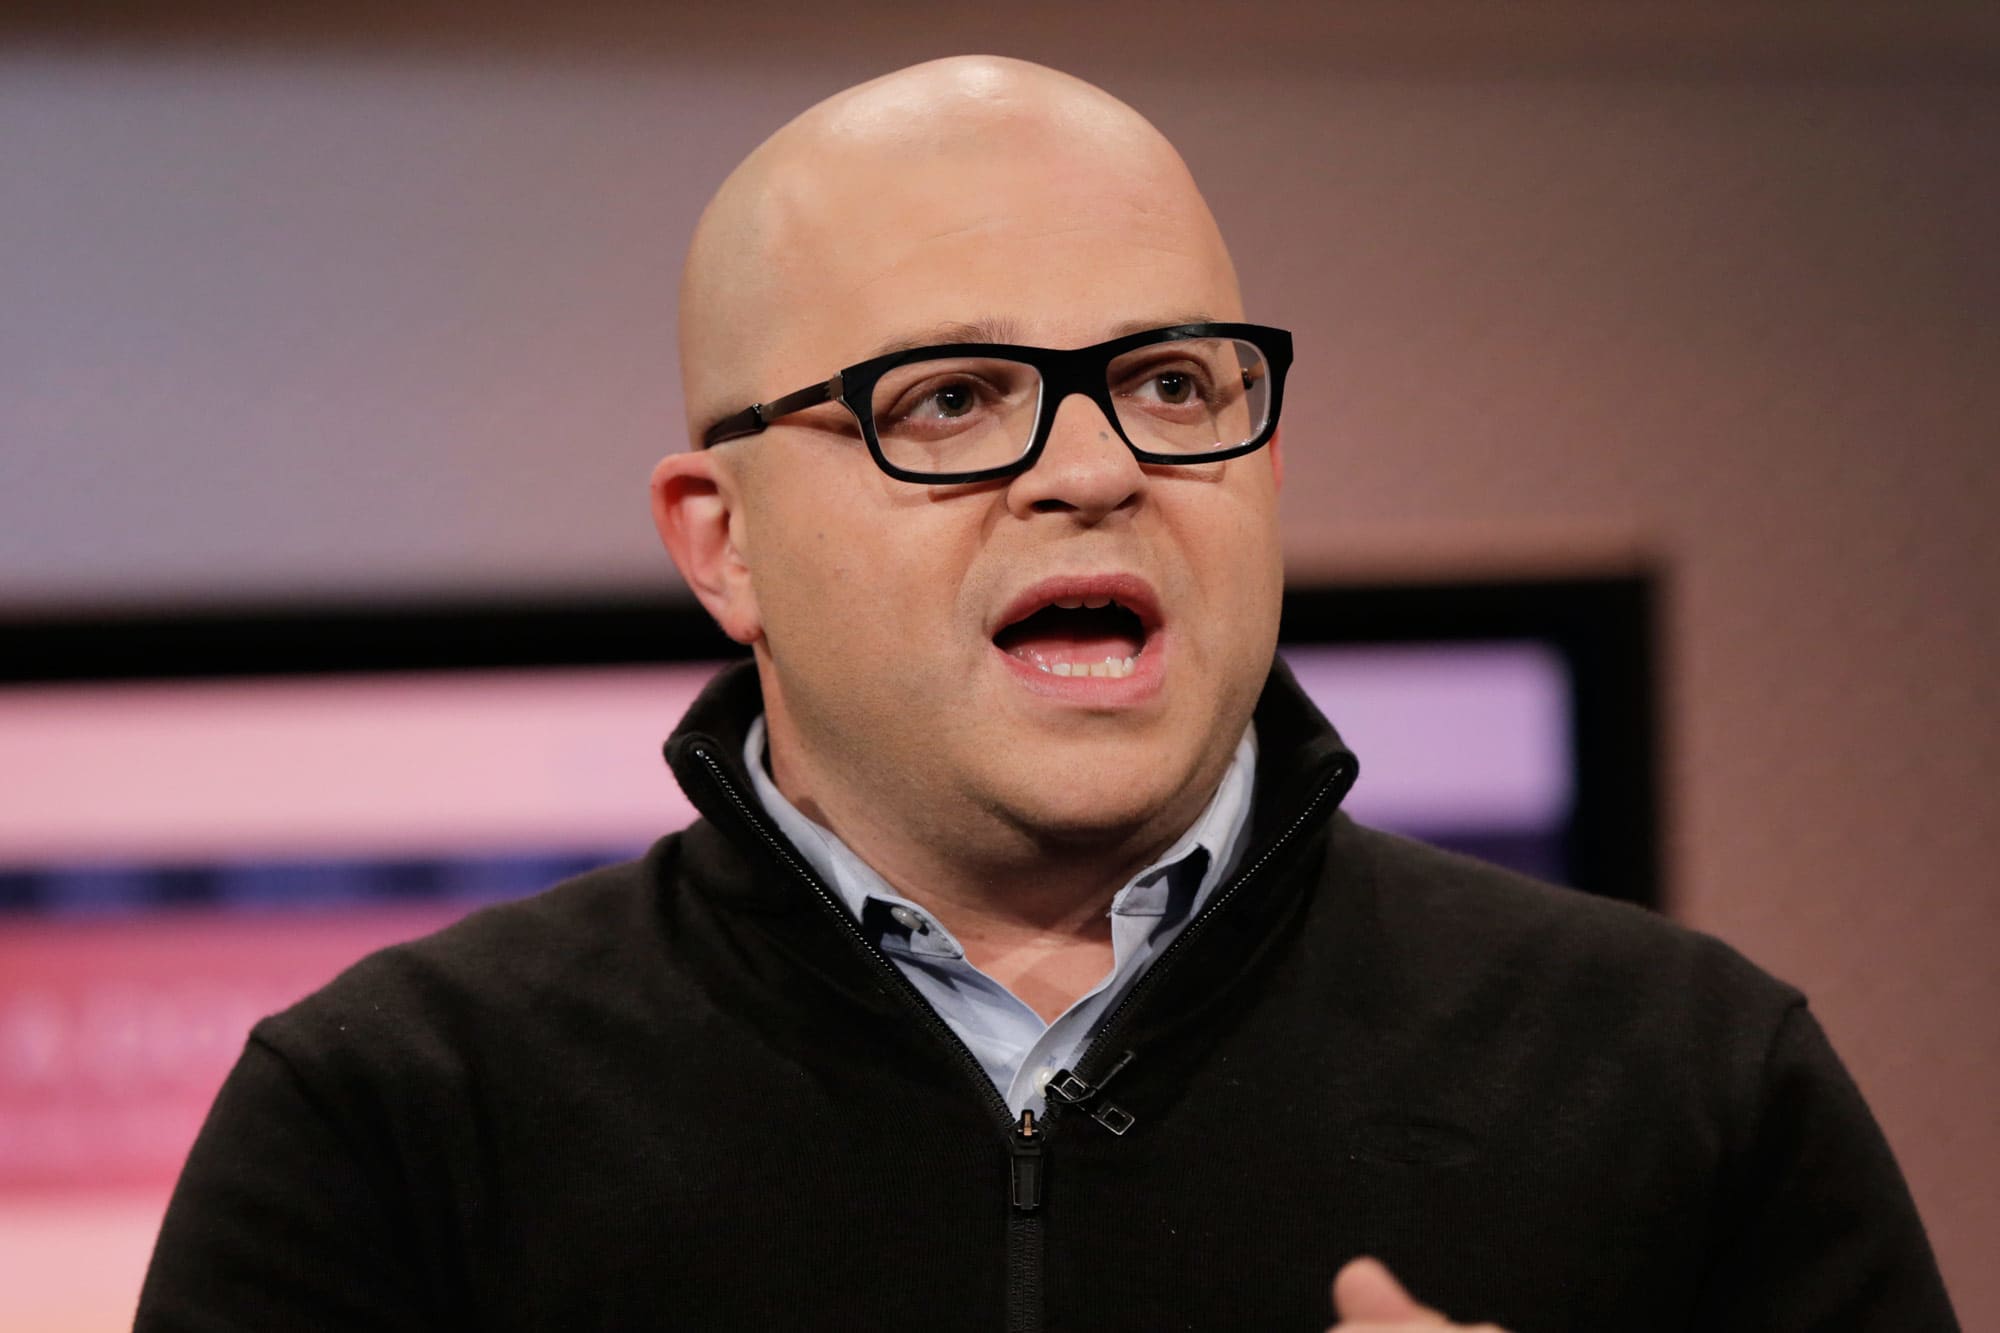 Twilio (TWLO) earnings in the fourth quarter of 2020